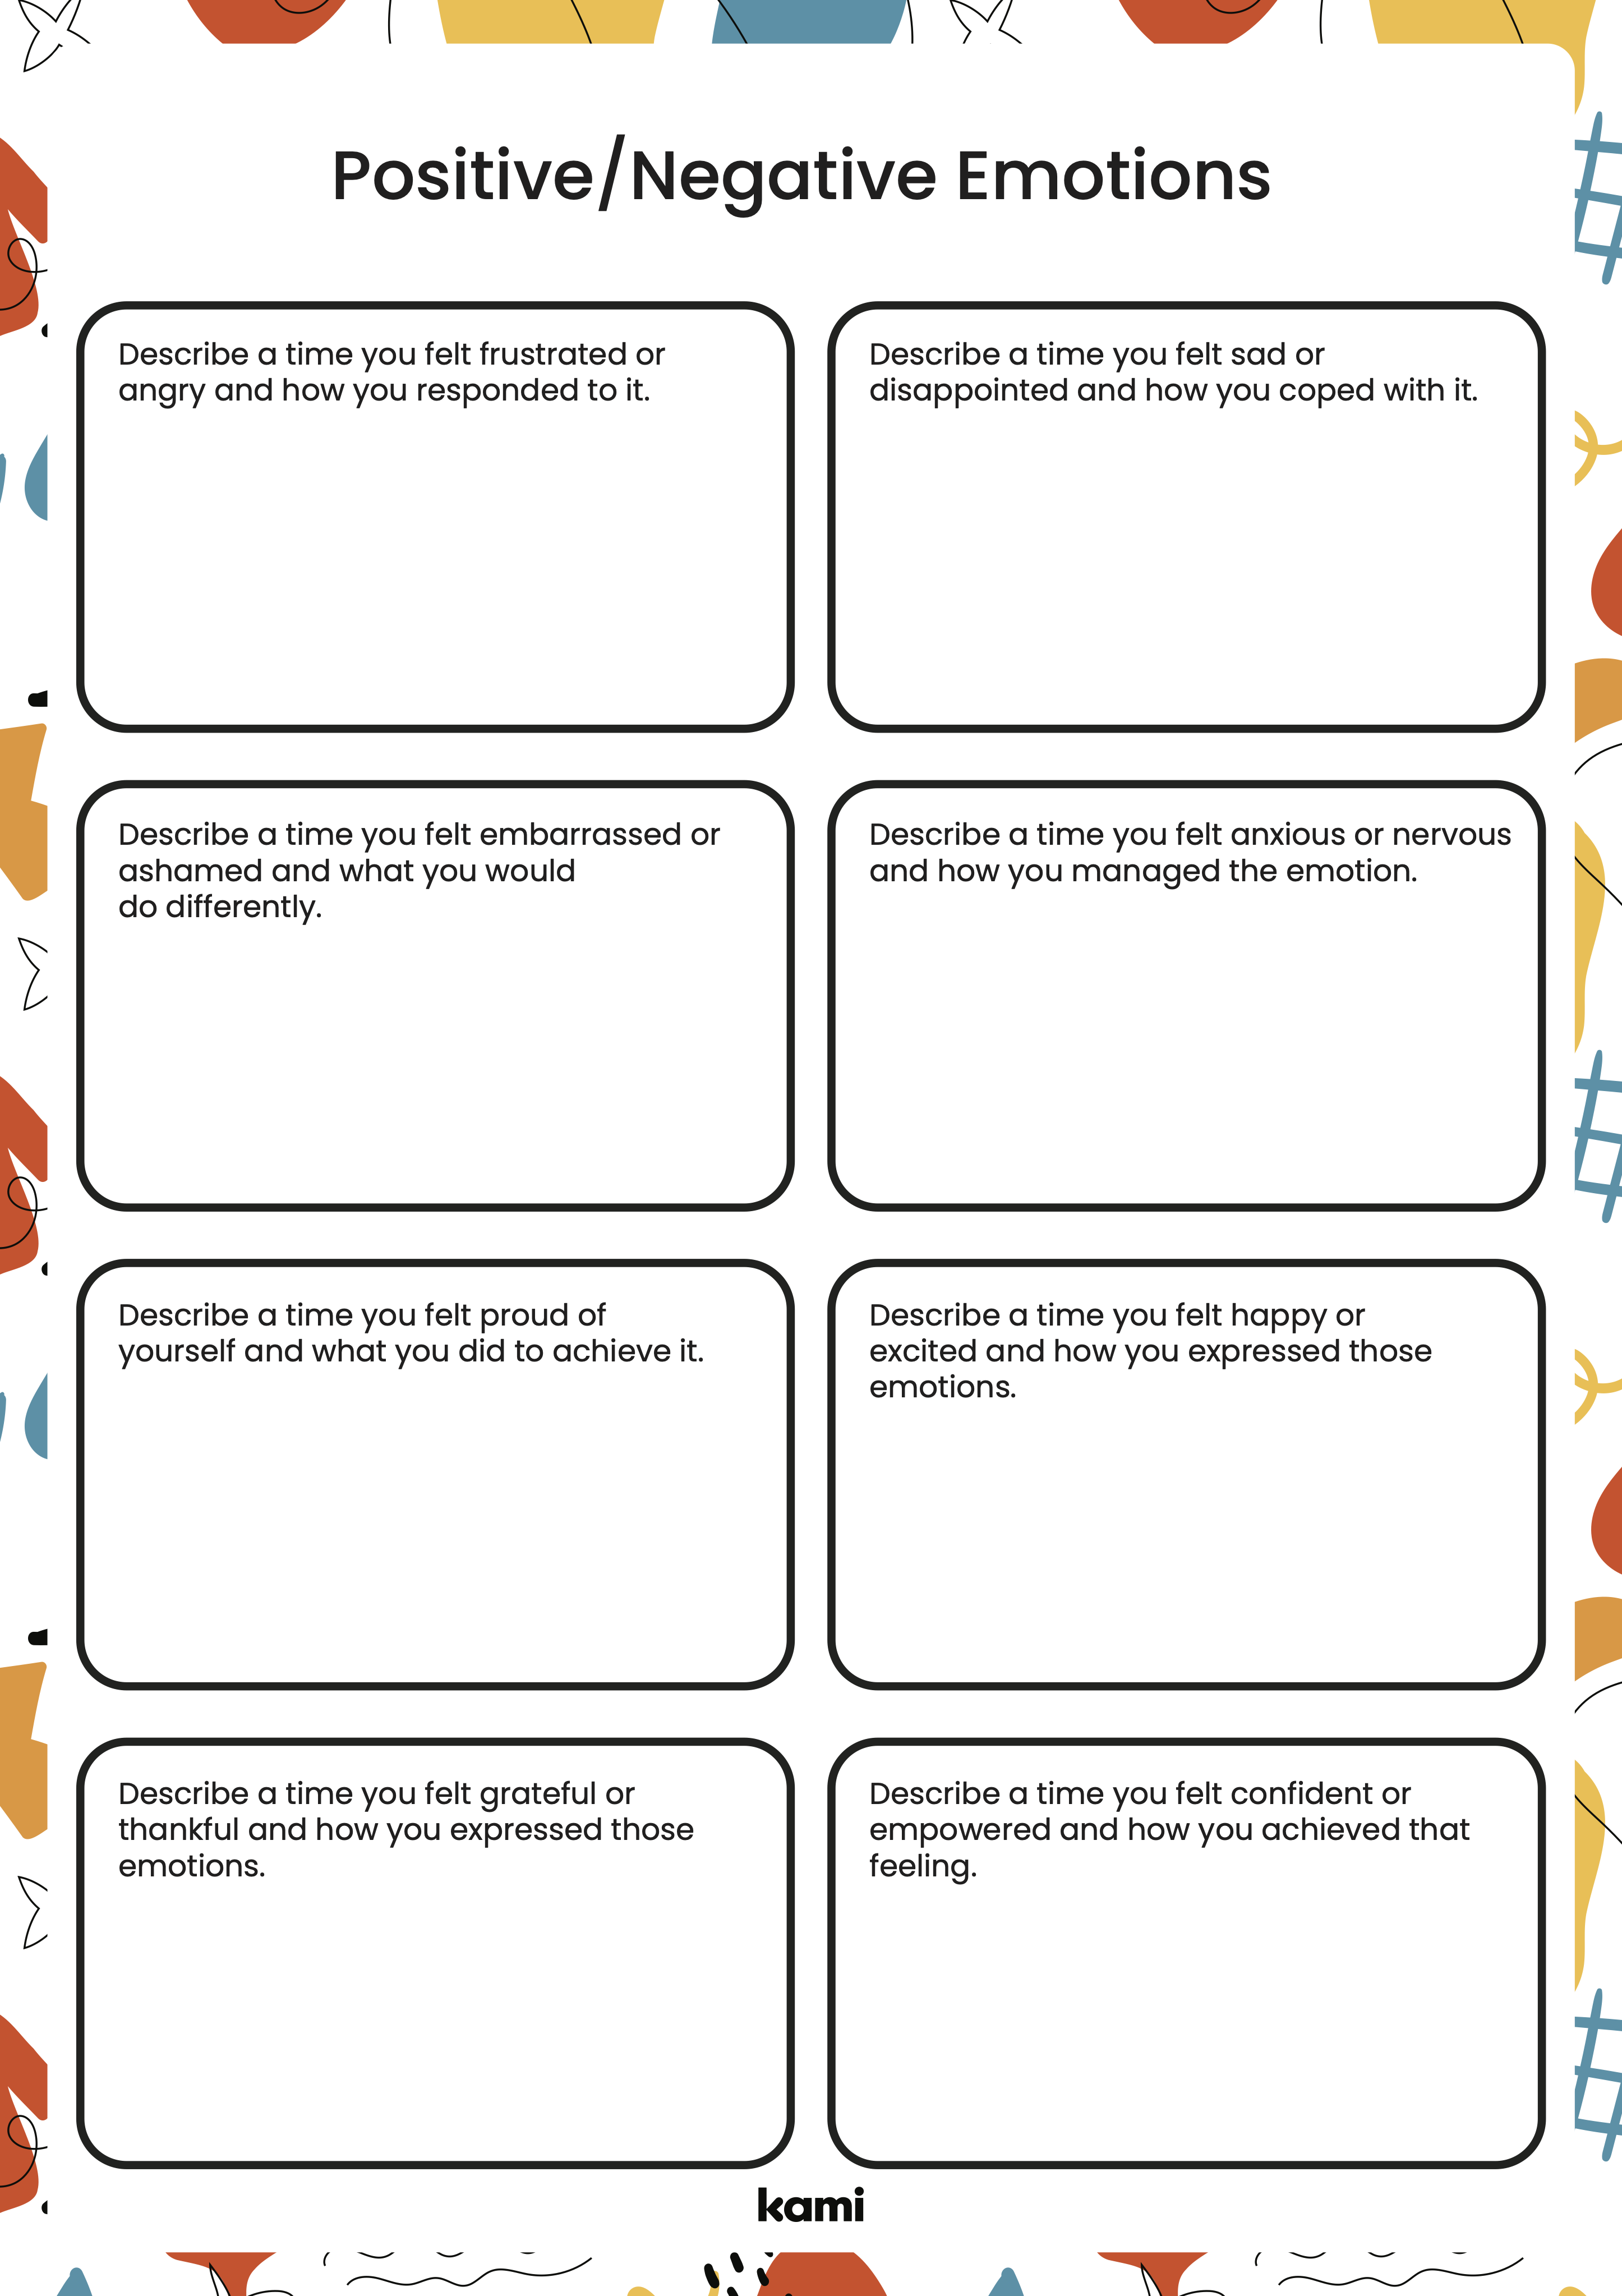 Positive/Negative Emotions Worksheet | Colorful for Teachers | Perfect ...